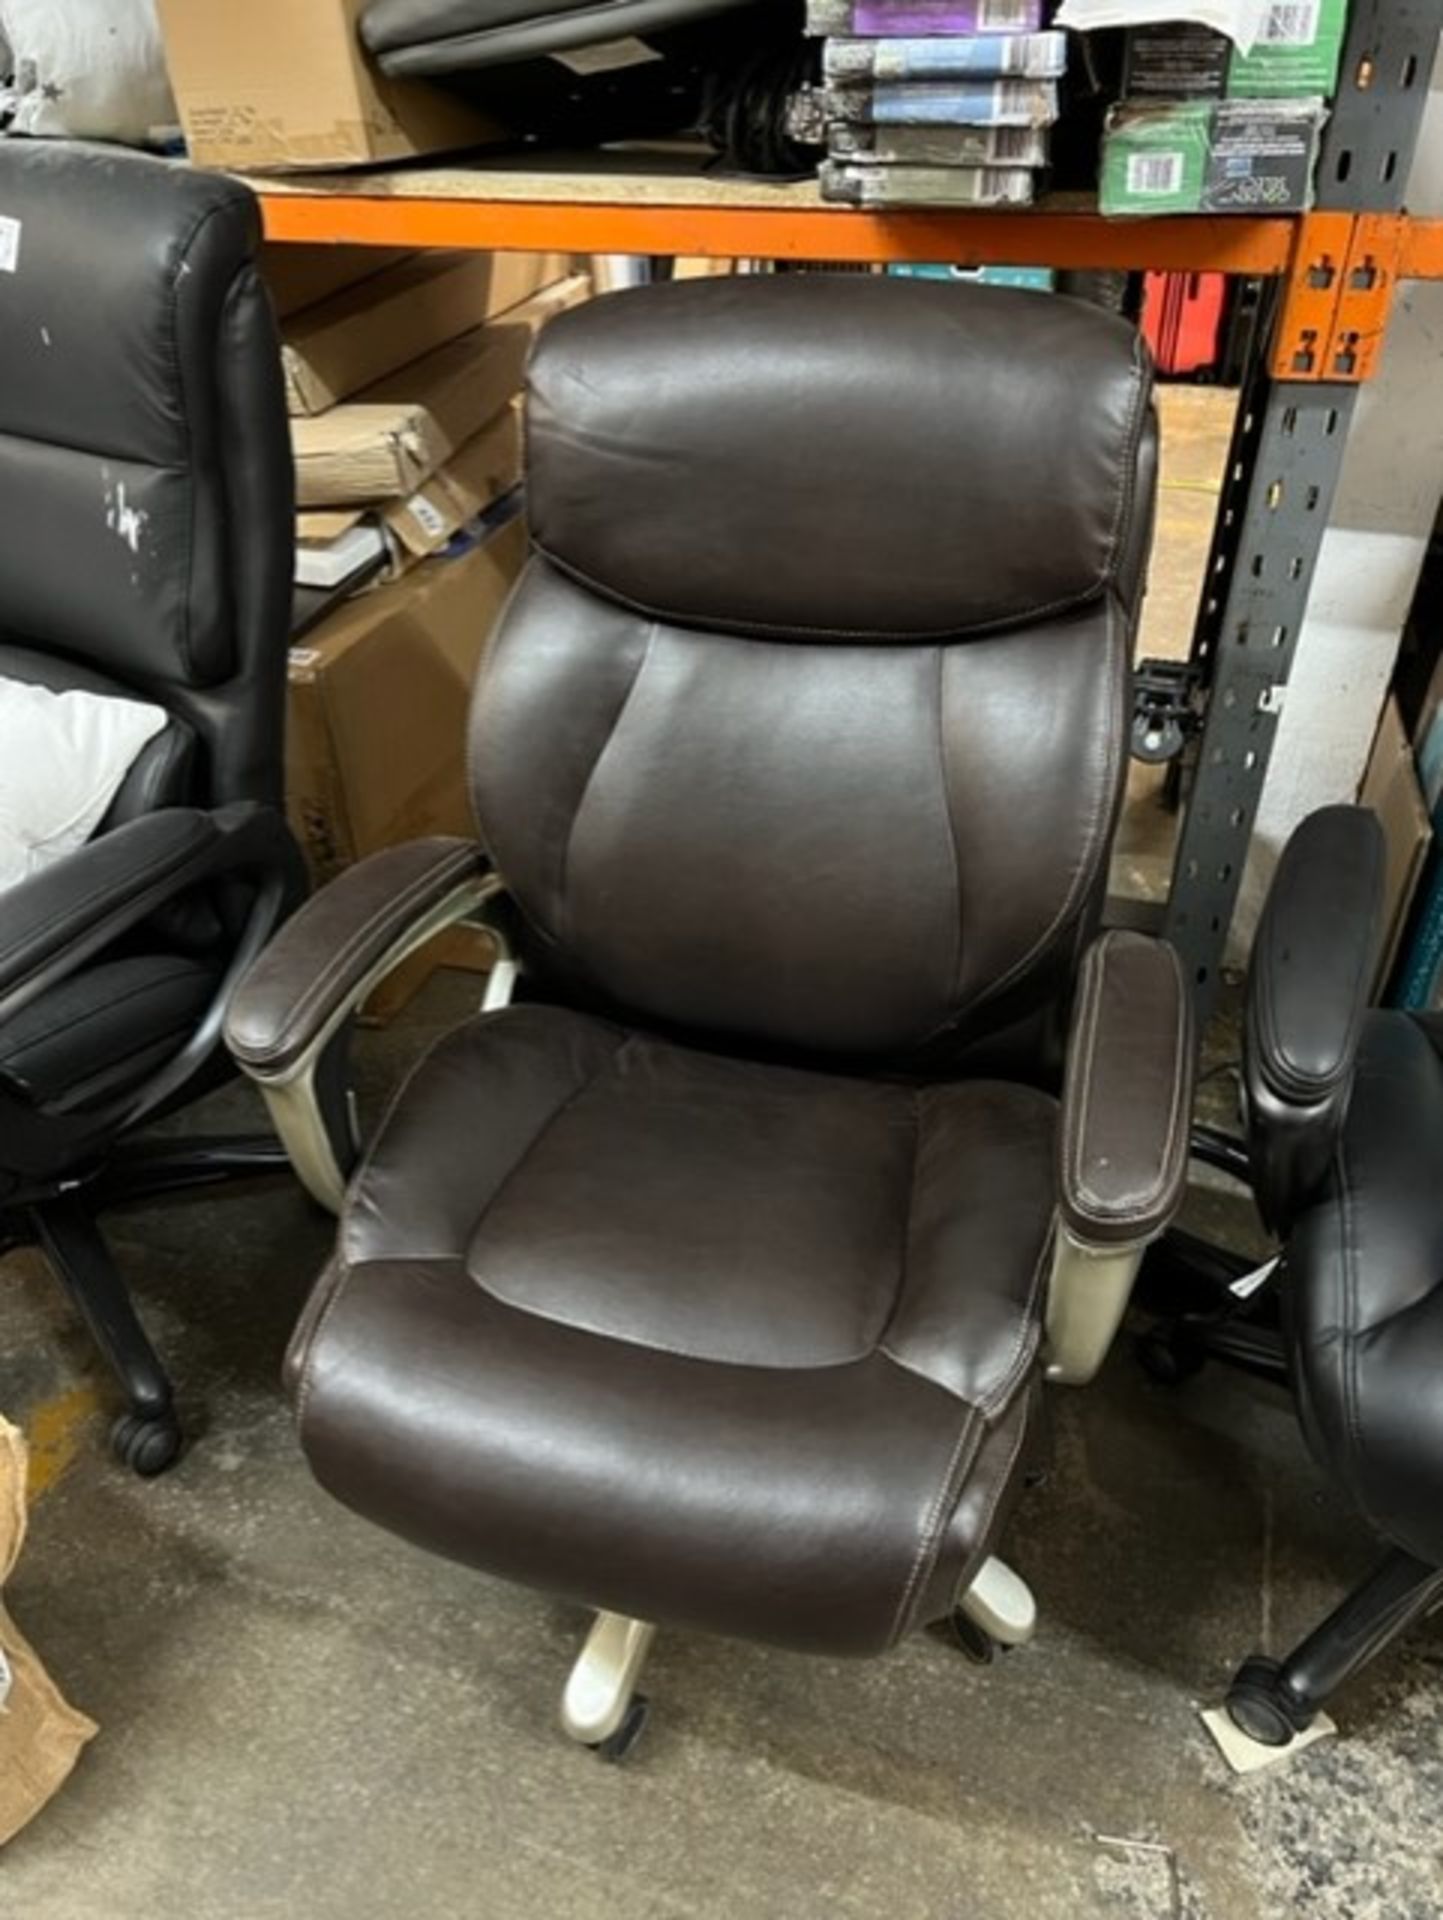 1 TRUE INNOVATIONS MAGIC BROWN BACK MANAGER CHAIR RRP Â£199